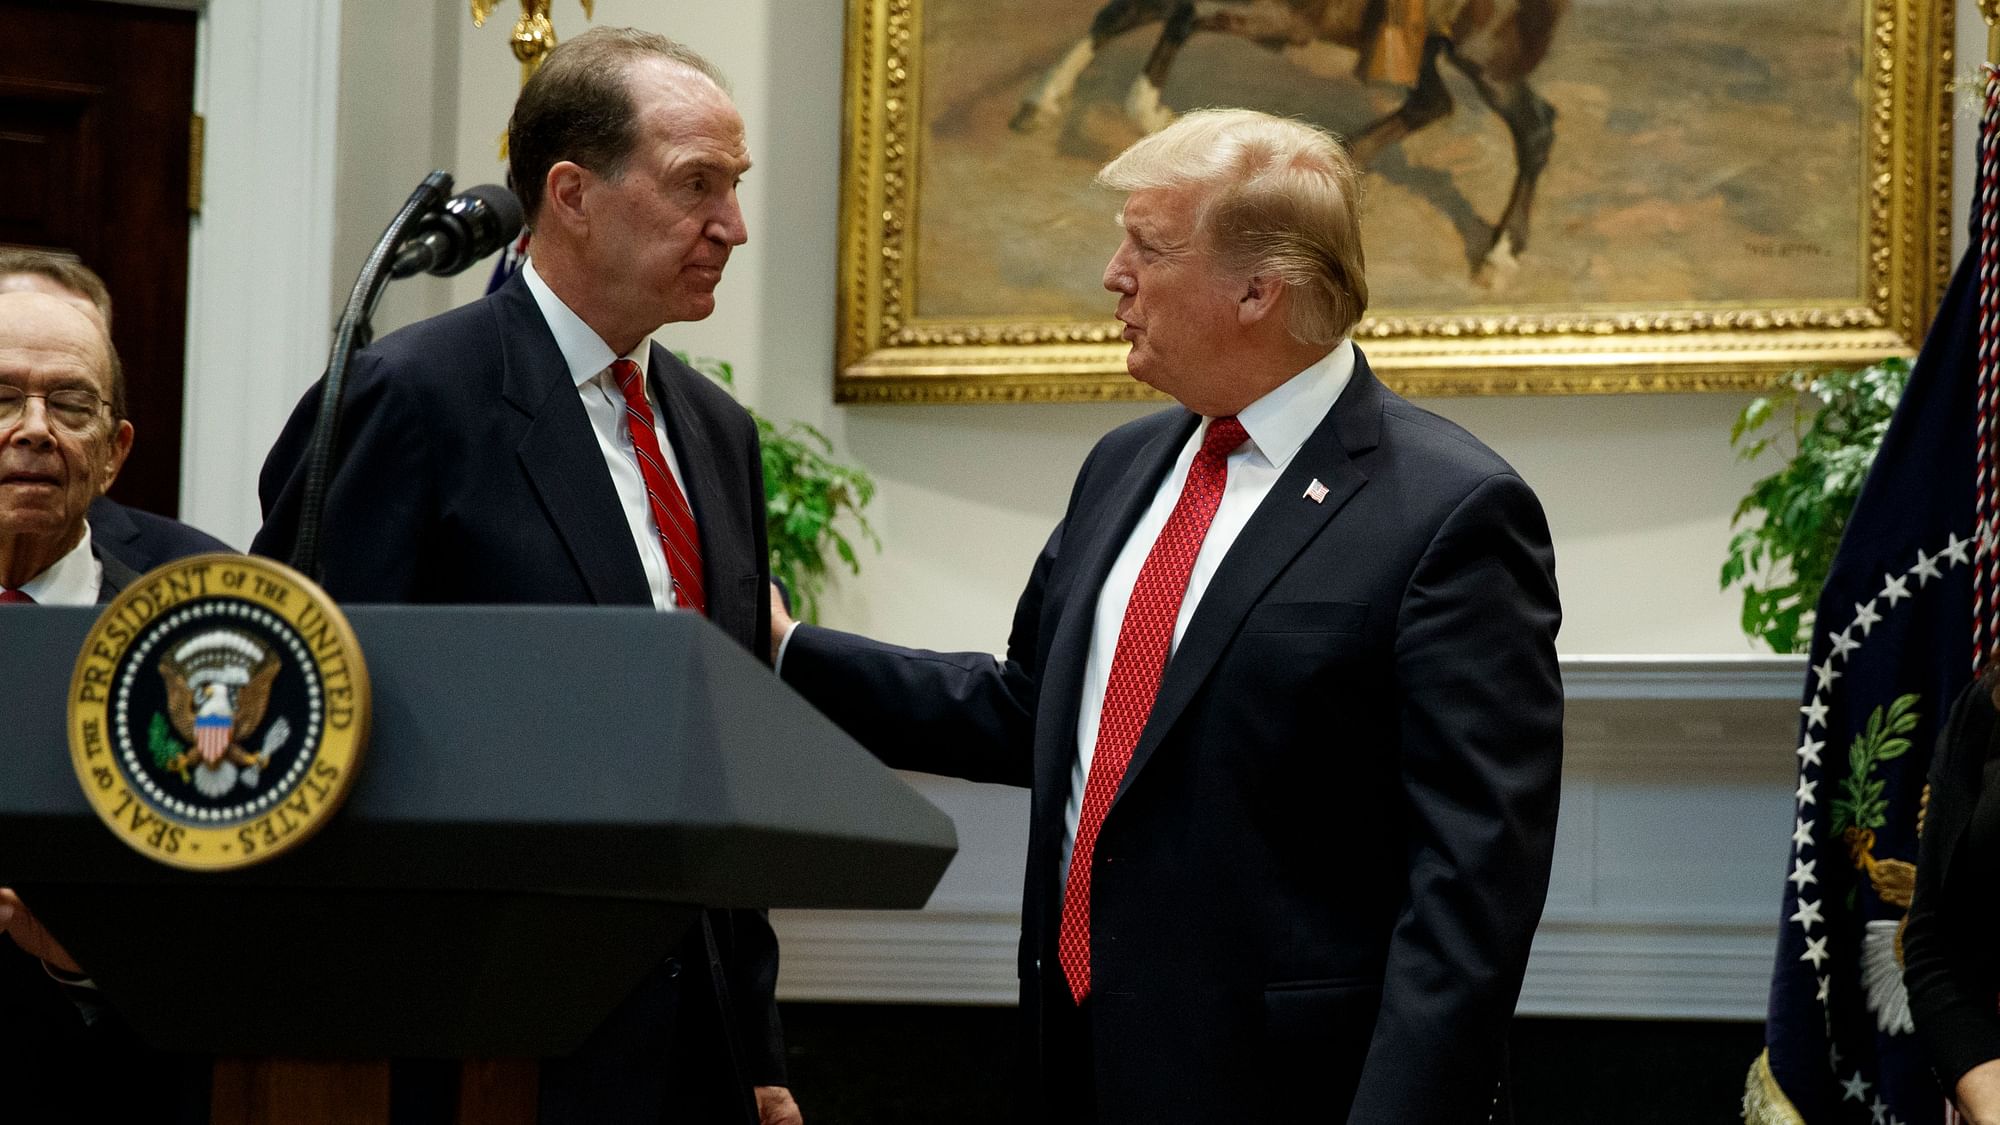 President Donald Trump congratulates David Malpass, under secretary of the Treasury for international affairs, after announcing his nomination to head the World Bank